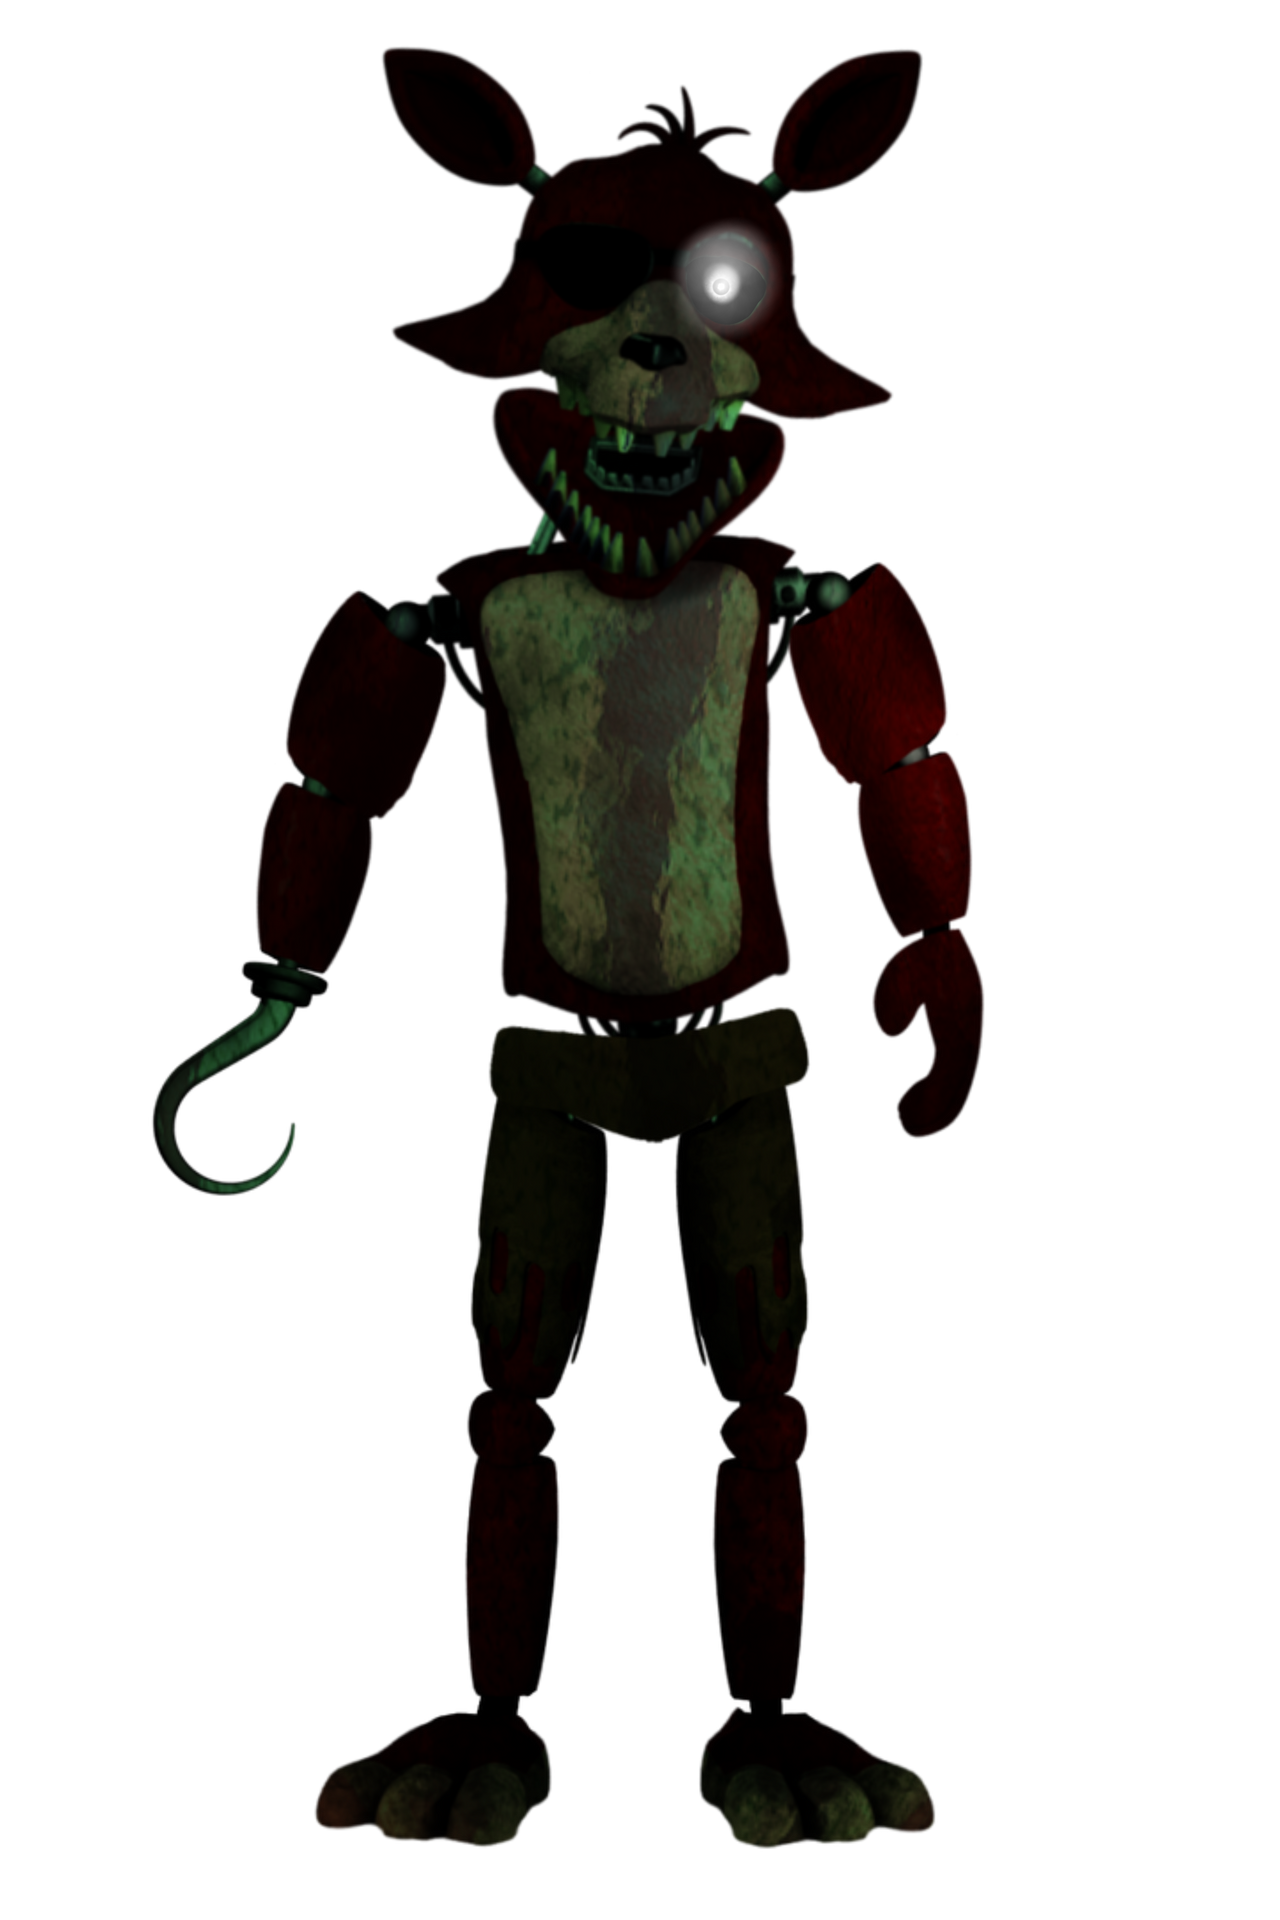 Thudner on X: Fnaf pack update: Added fixed foxy and the fnaf 3 props,  also fixed the foxy plushies eye textures  / X